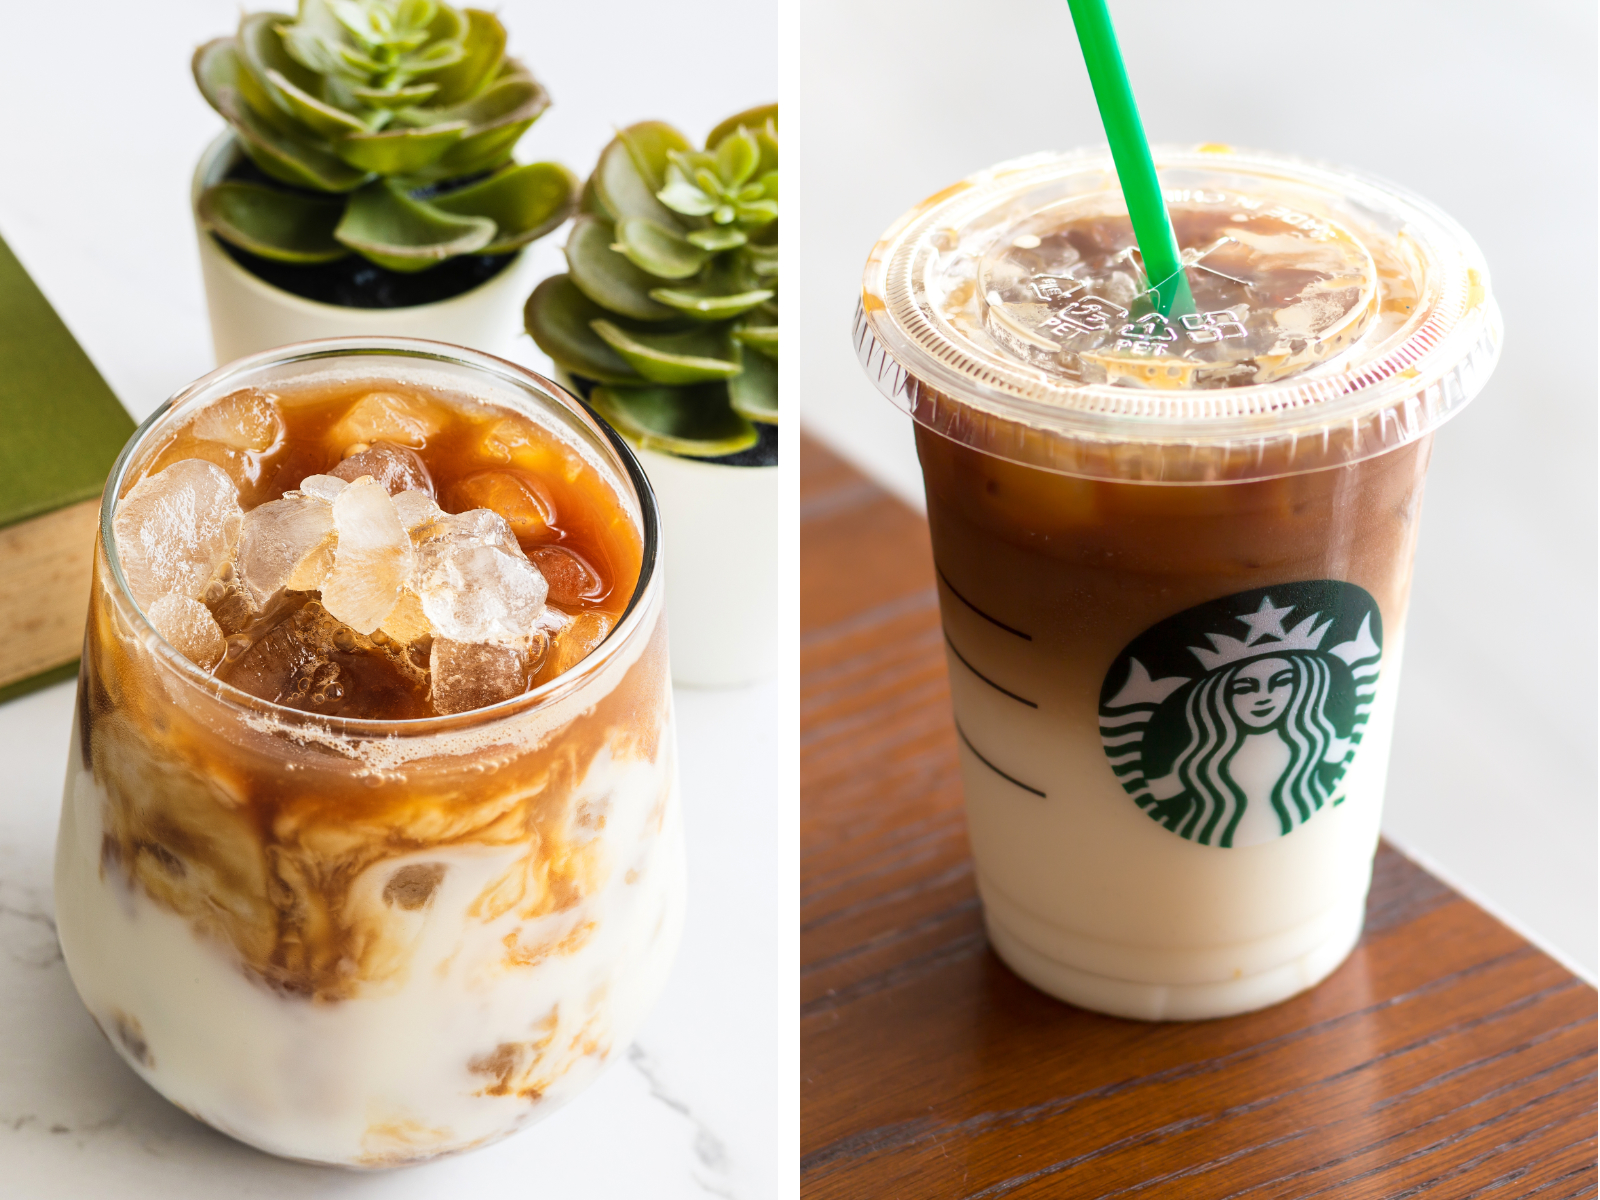 iced coffee drink and a starbucks copy cat